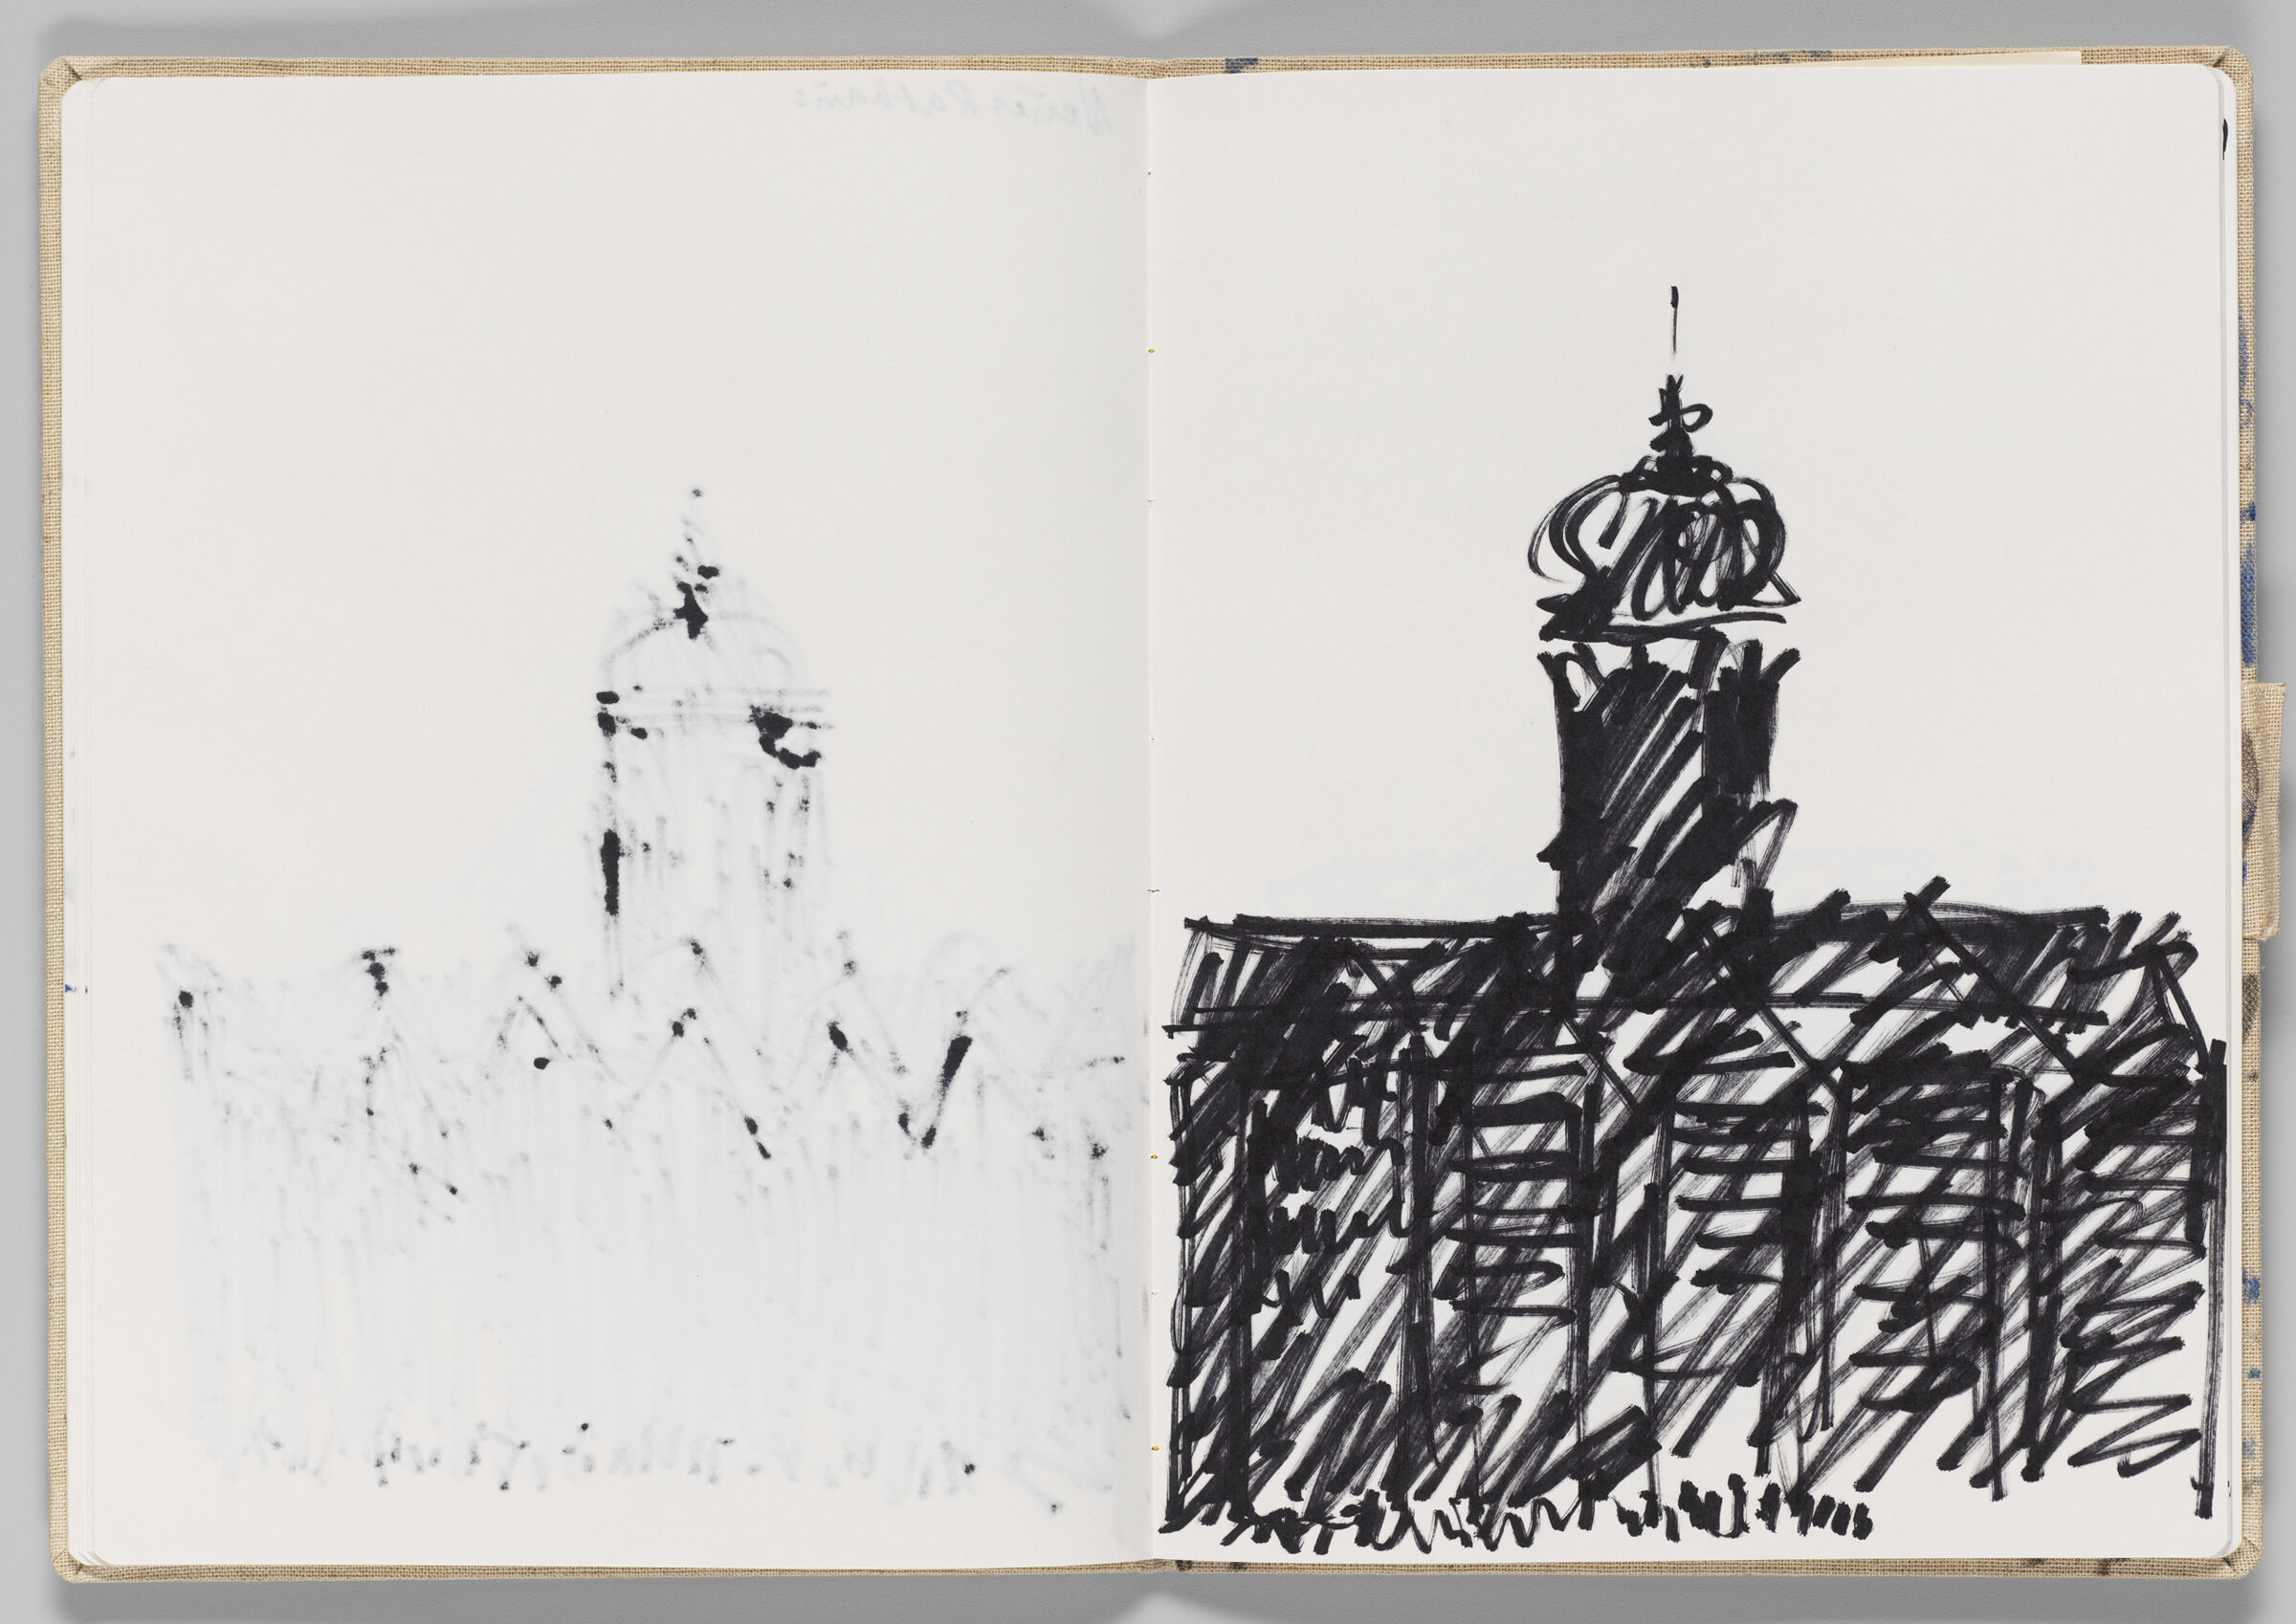 Untitled (Bleed-Through Of Previous Page, Left Page); Untitled (Neues Rathaus In Leipzig, Right Page)